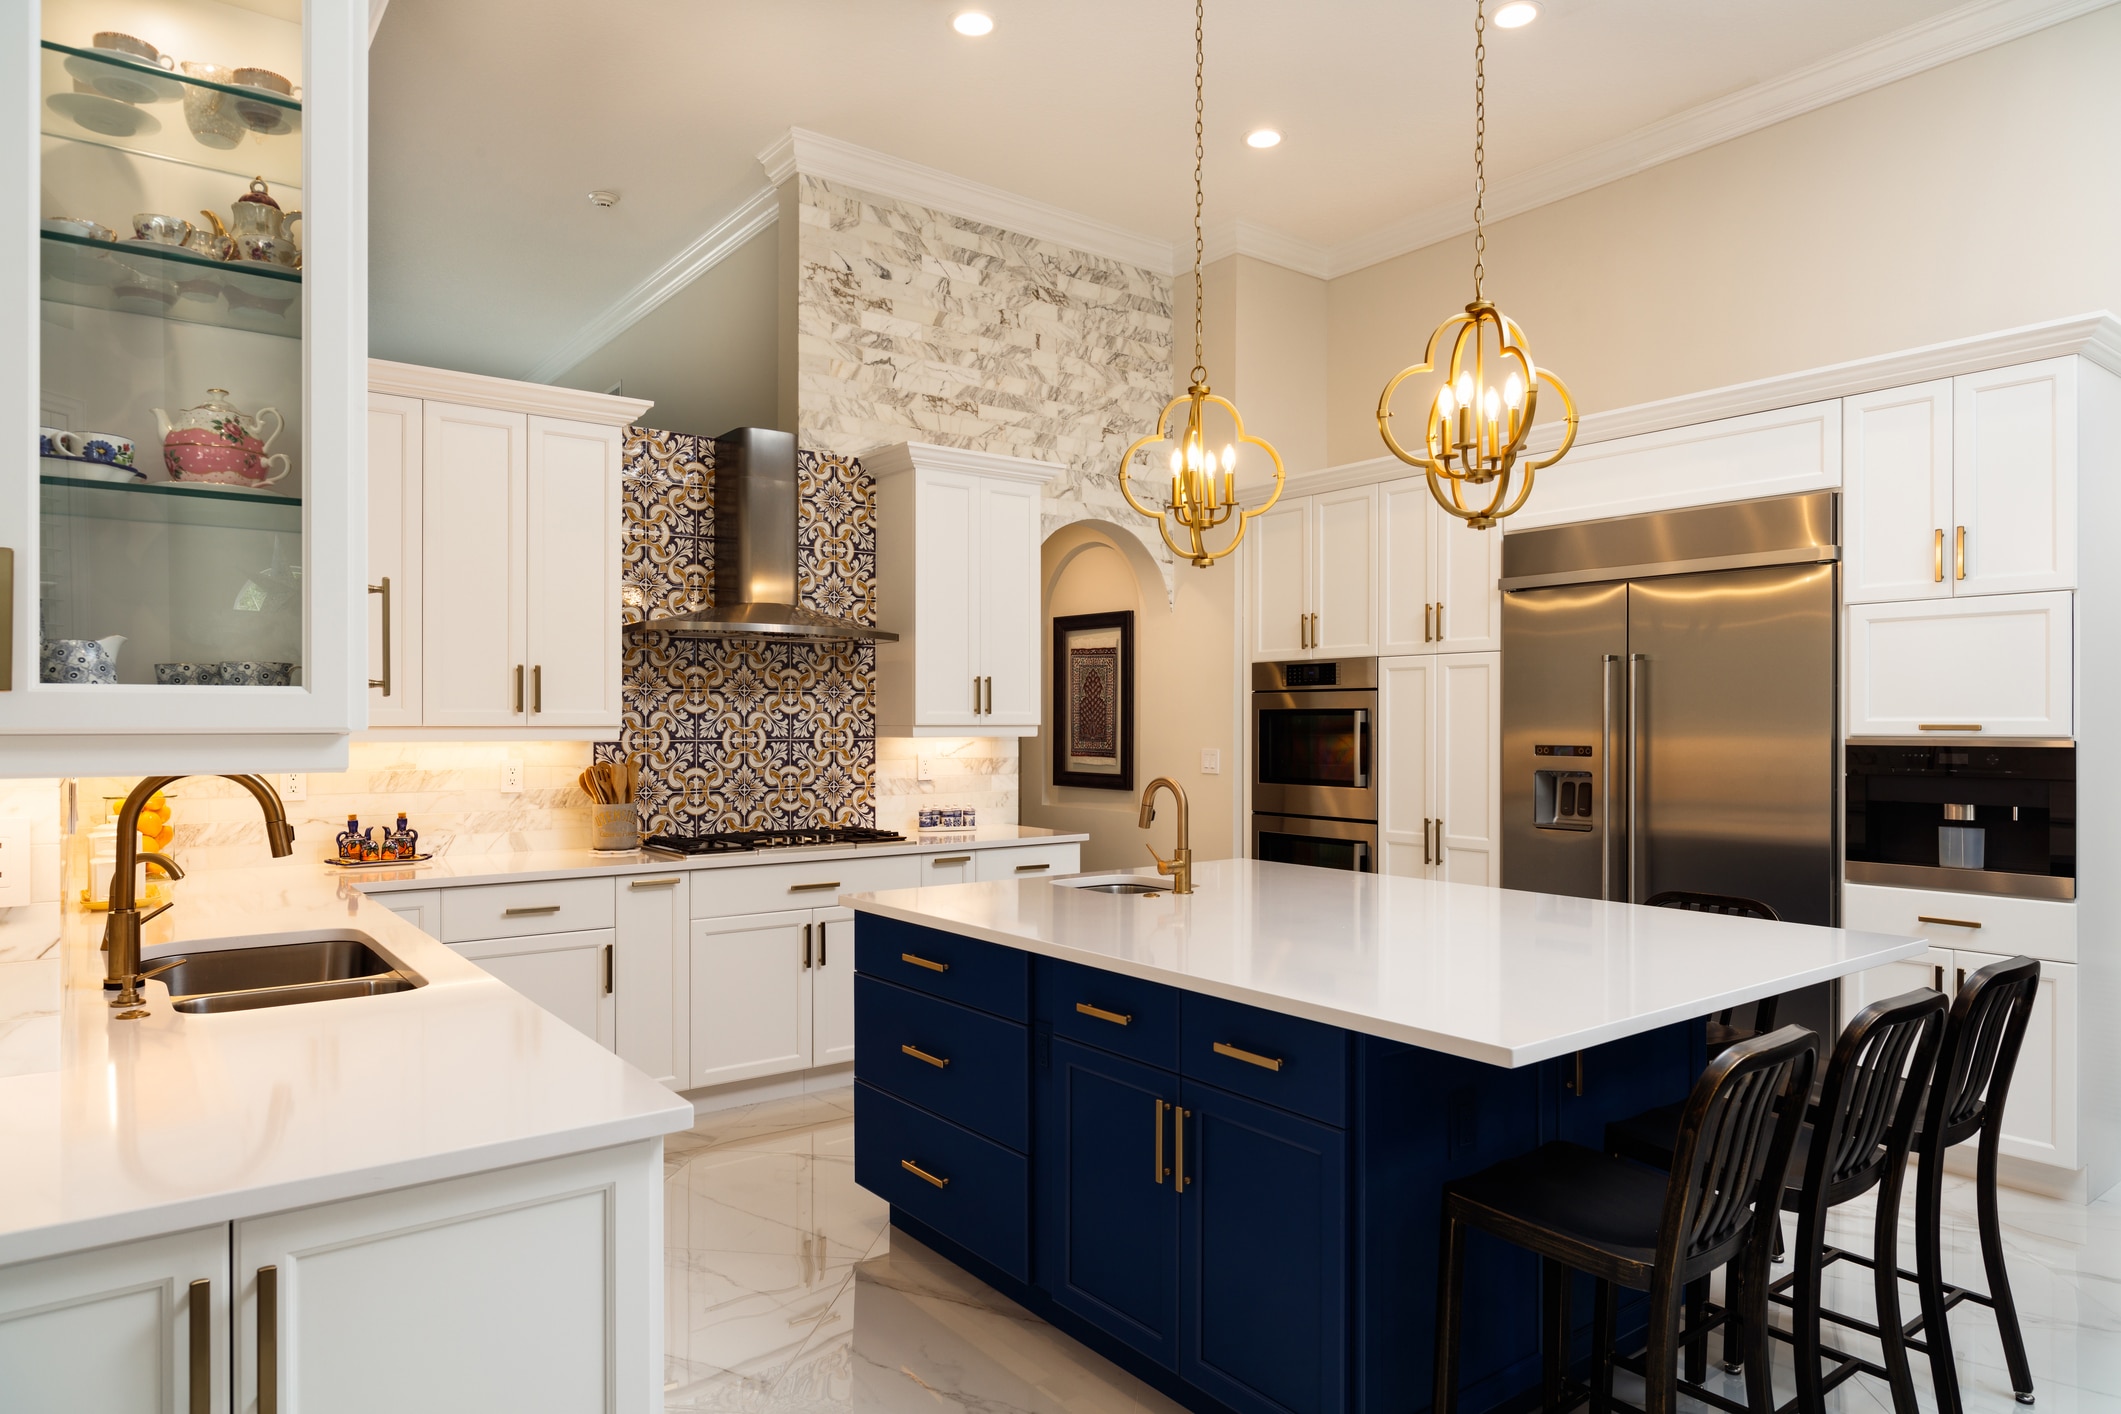 The Consumer’s Guide to Hiring a Kitchen Remodeling Contractor